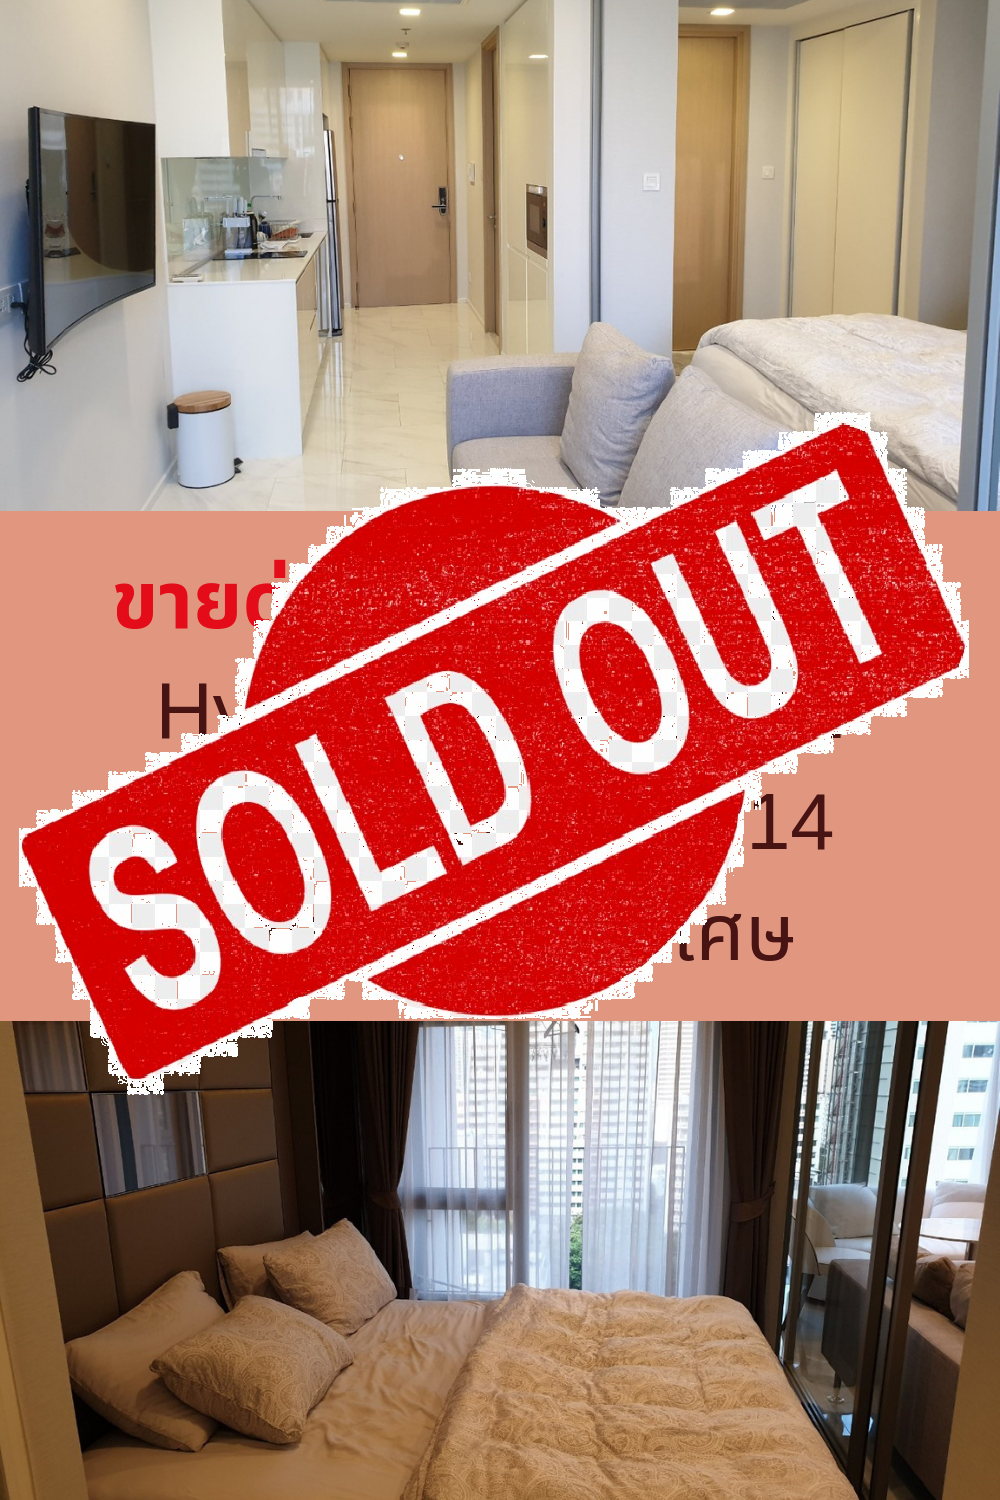 Sold Out The Hyde Sukhumvit 11, Condo for sale near BTS nana, 33 Sqm. 14 Floor City View